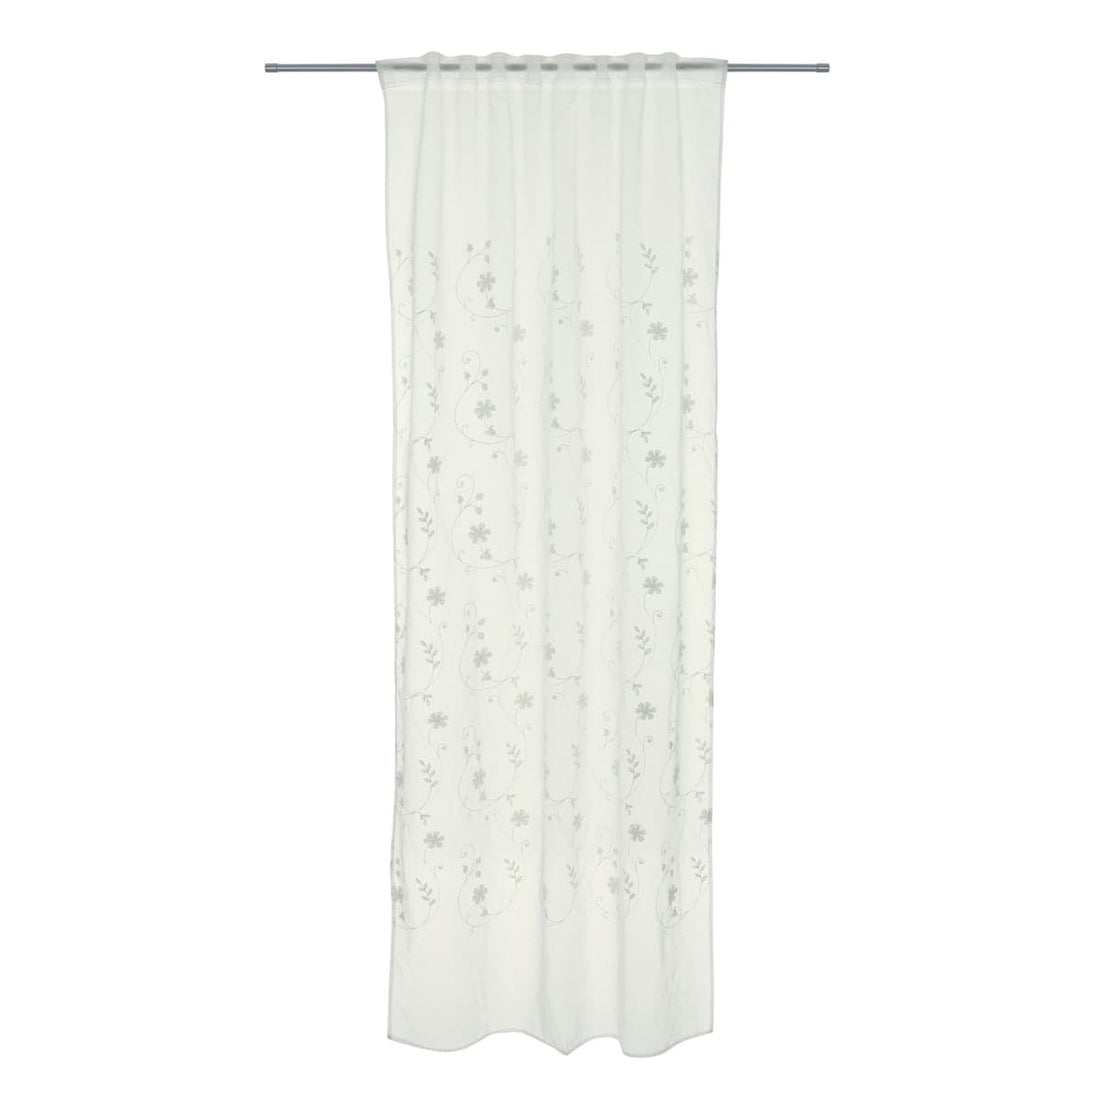 BRODE FLOR WHITE FILTER CURTAIN 140X280 CM WITH CONCEALED LOOP AND WEBBING - best price from Maltashopper.com BR480007411